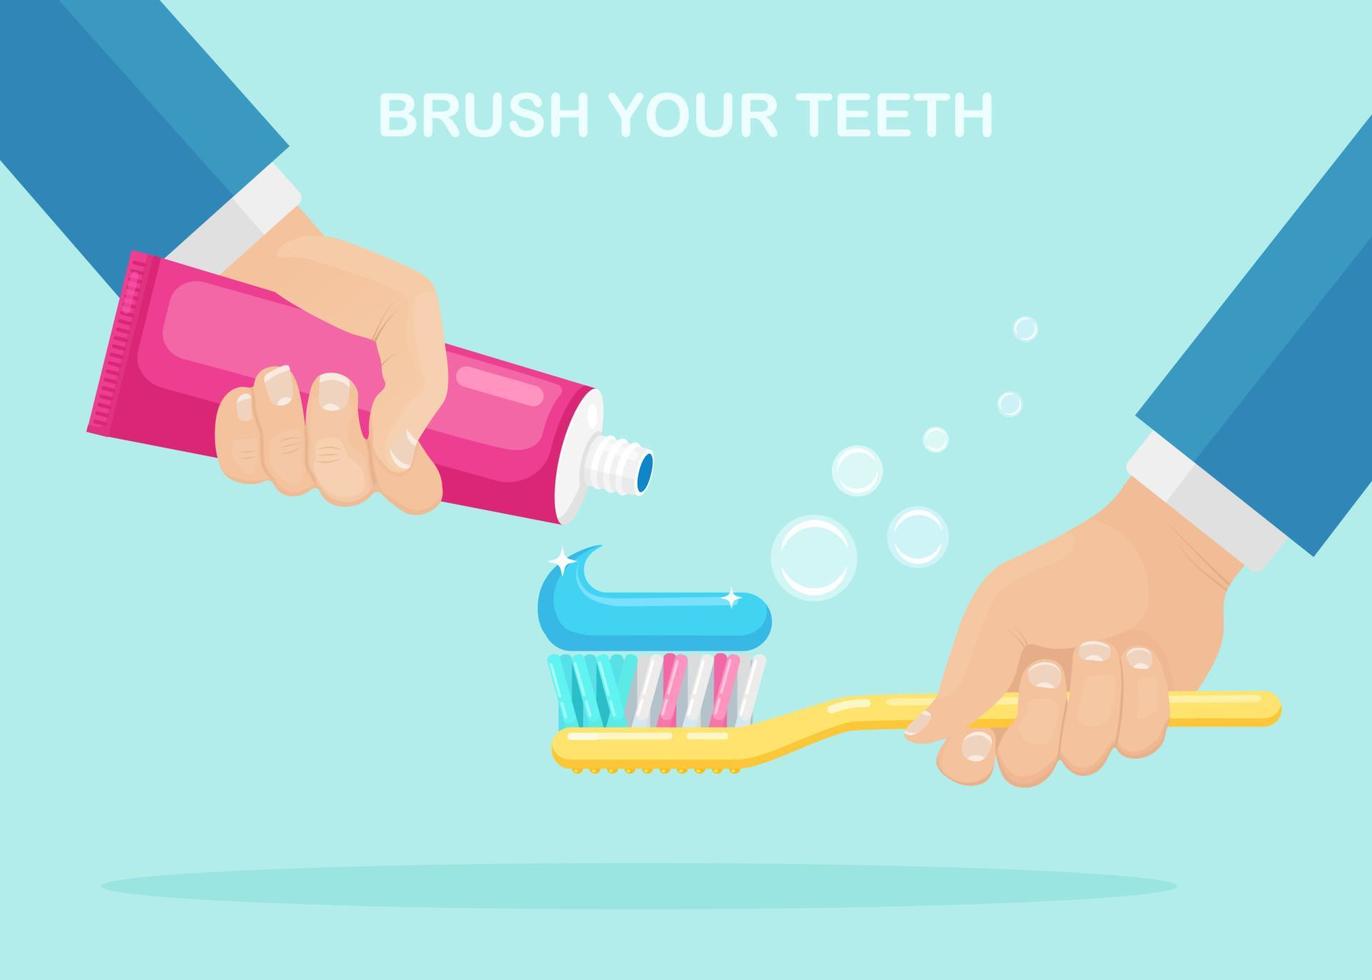 Brushing Teeth. Man hold toothbrush and toothpaste tube. Dental care concept. Oral hygiene. Vector design